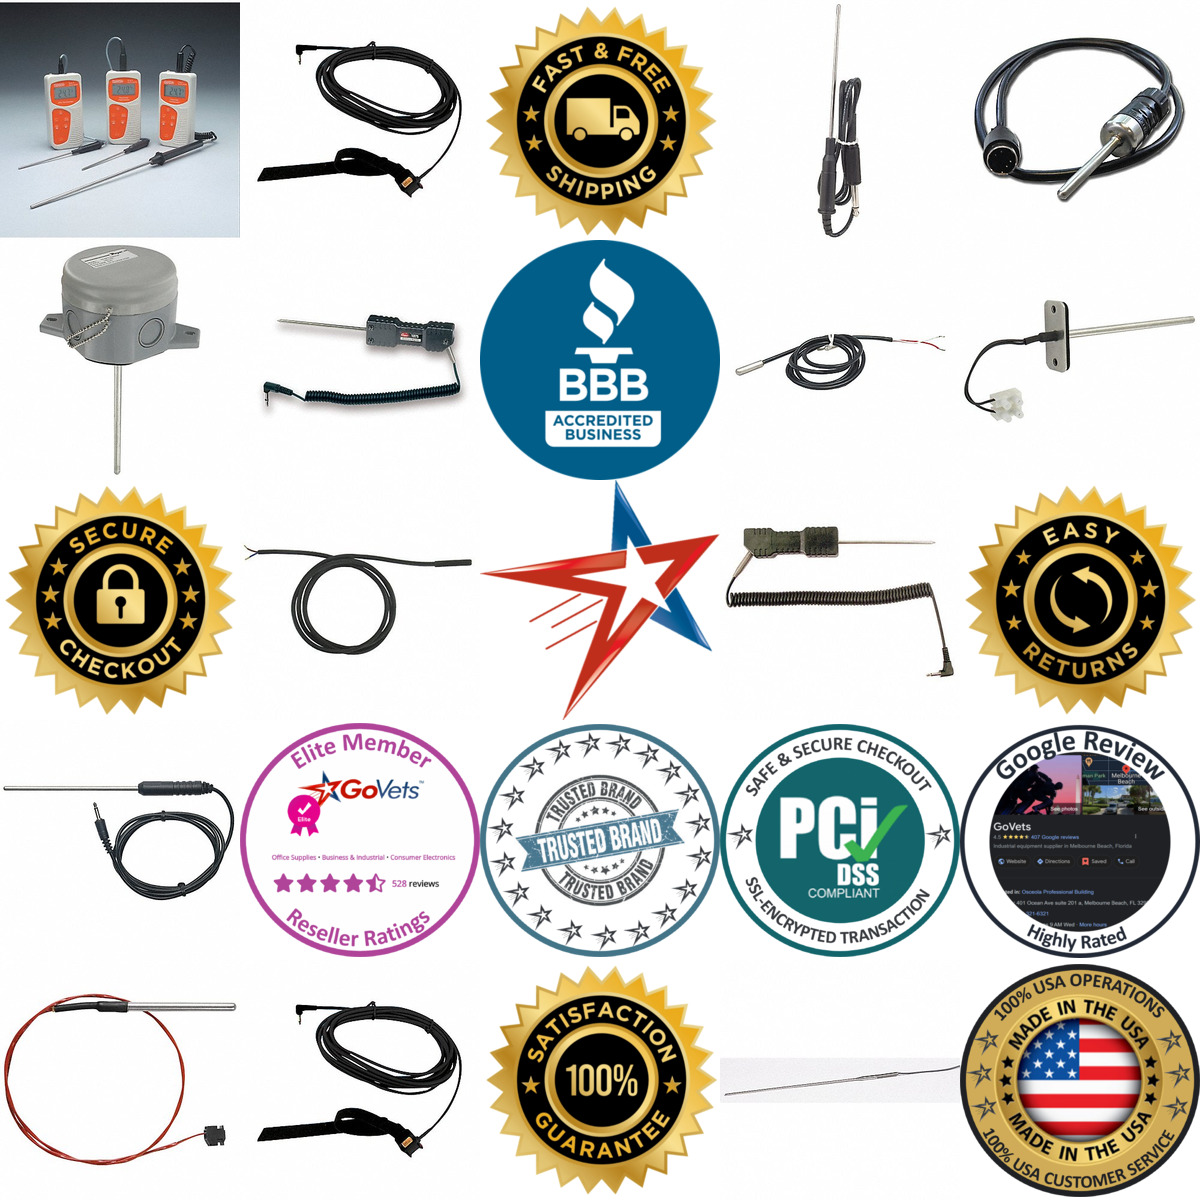 A selection of Thermistor Probes products on GoVets